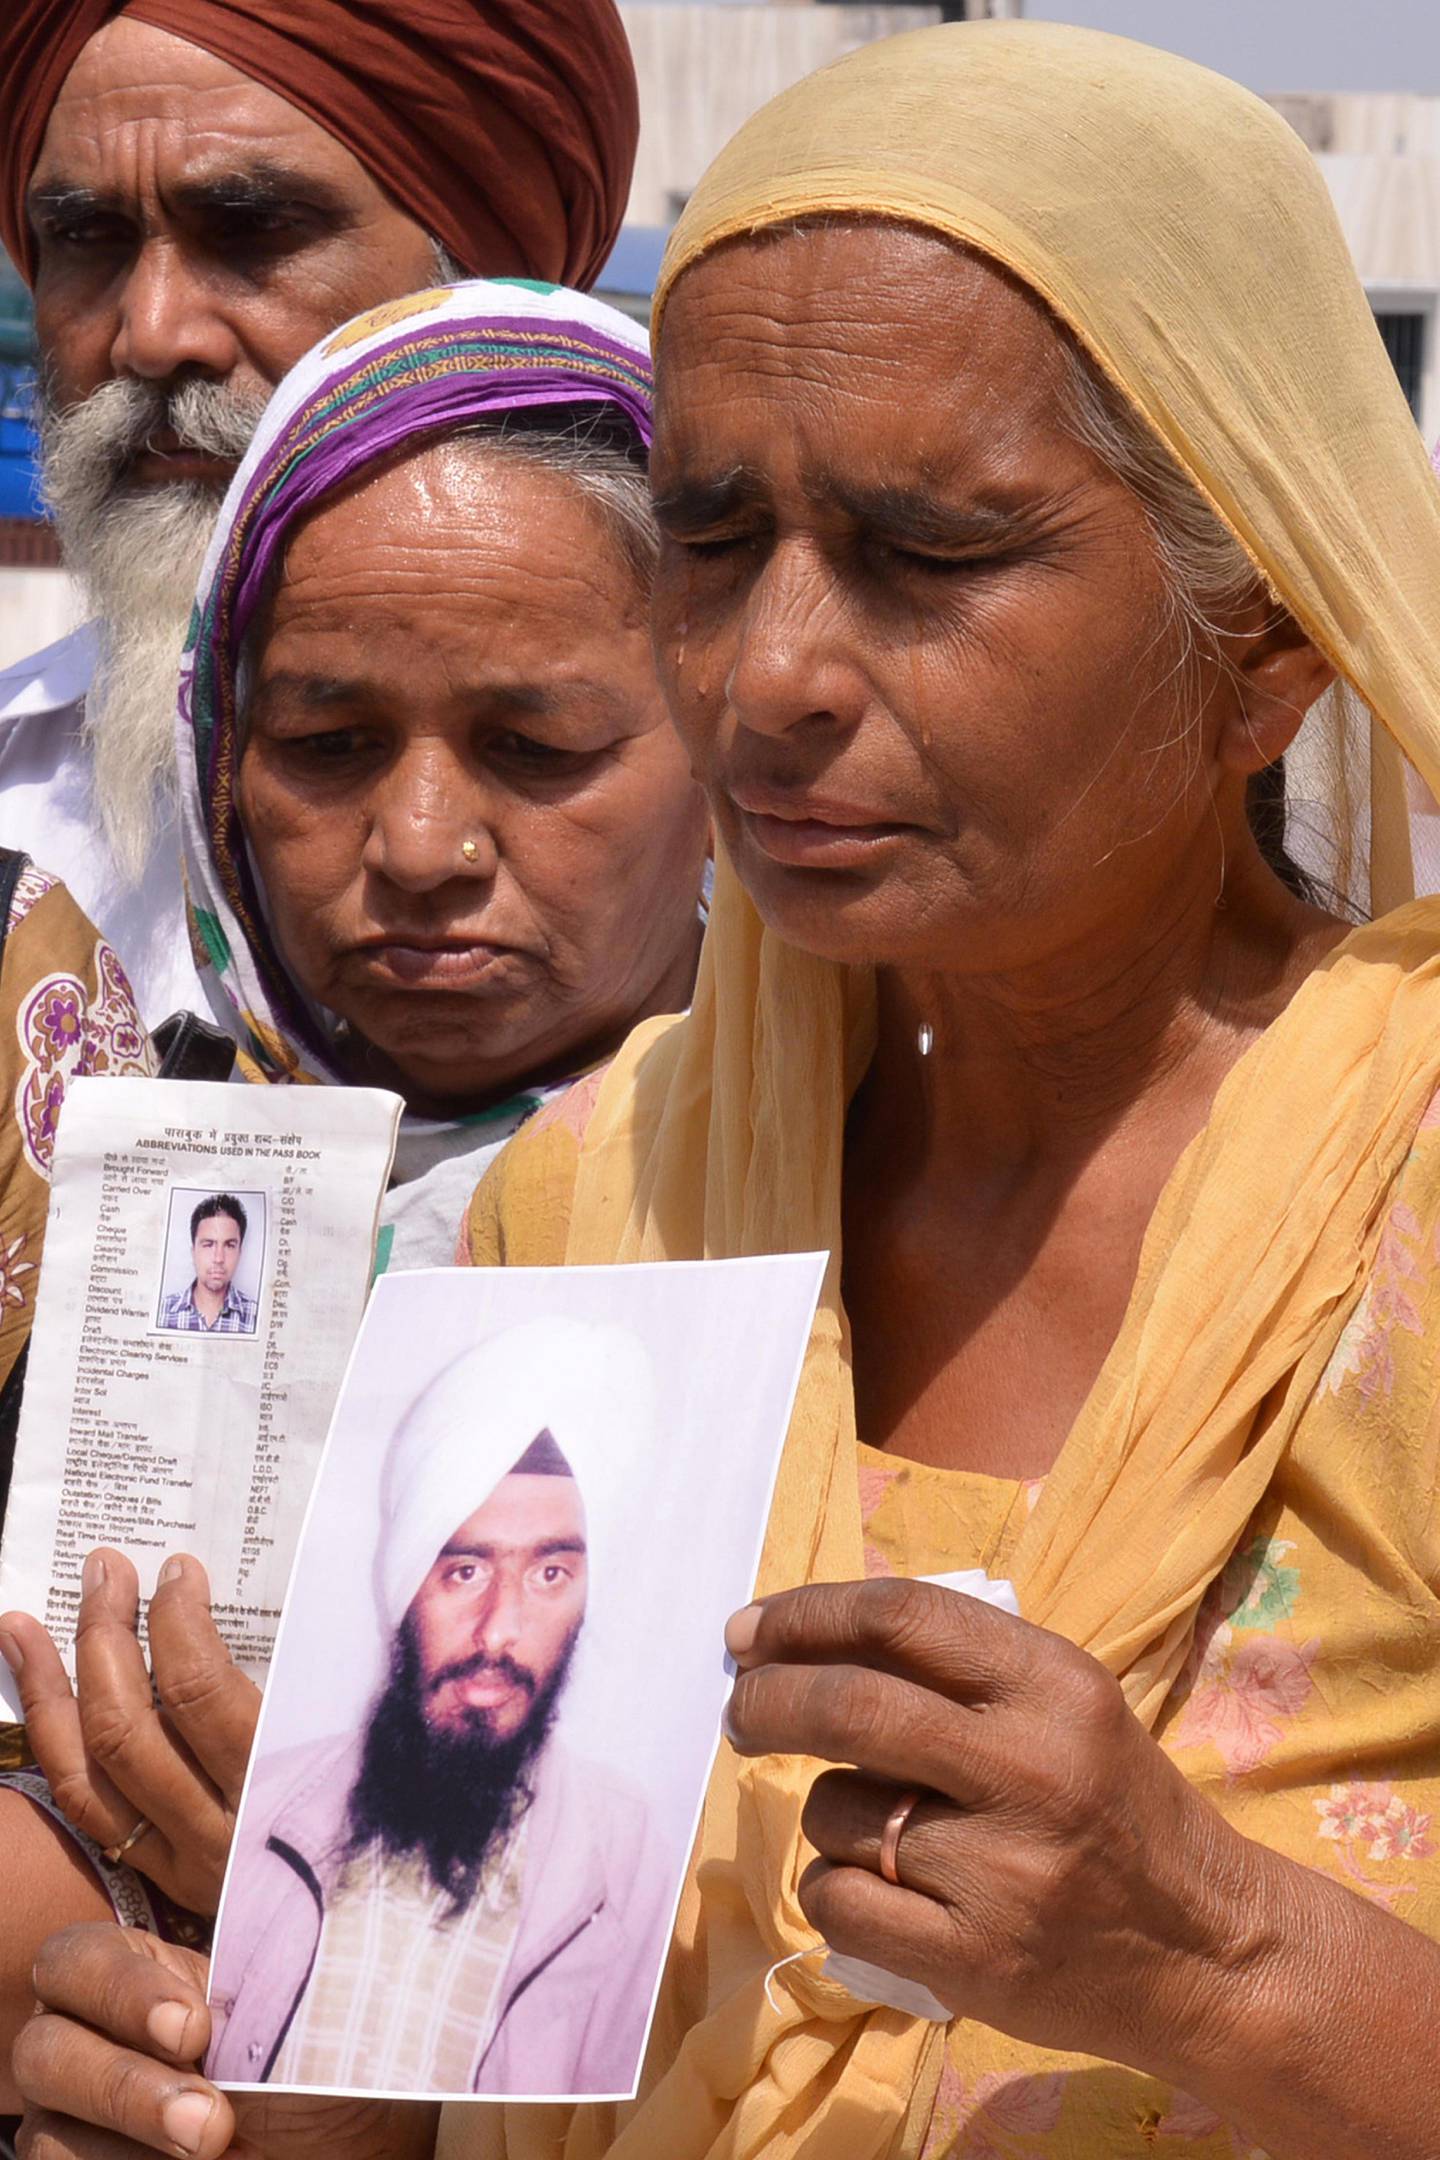 Relatives of Indian workers who were taken hostage in Iraq pose with photographs bearing their image during prayers for their release at the Gurdwara Baba Buddha Sahib at the village of Katthu Nangal, some 20 kms from Amritsar on June 24, 2014. India announced it would stop granting its nationals permission to travel to Iraq for work as it stepped up efforts to secure the release of 39 Indians abducted by gunmen. AFP PHOTO/NARINDER NANU / AFP PHOTO / NARINDER NANU